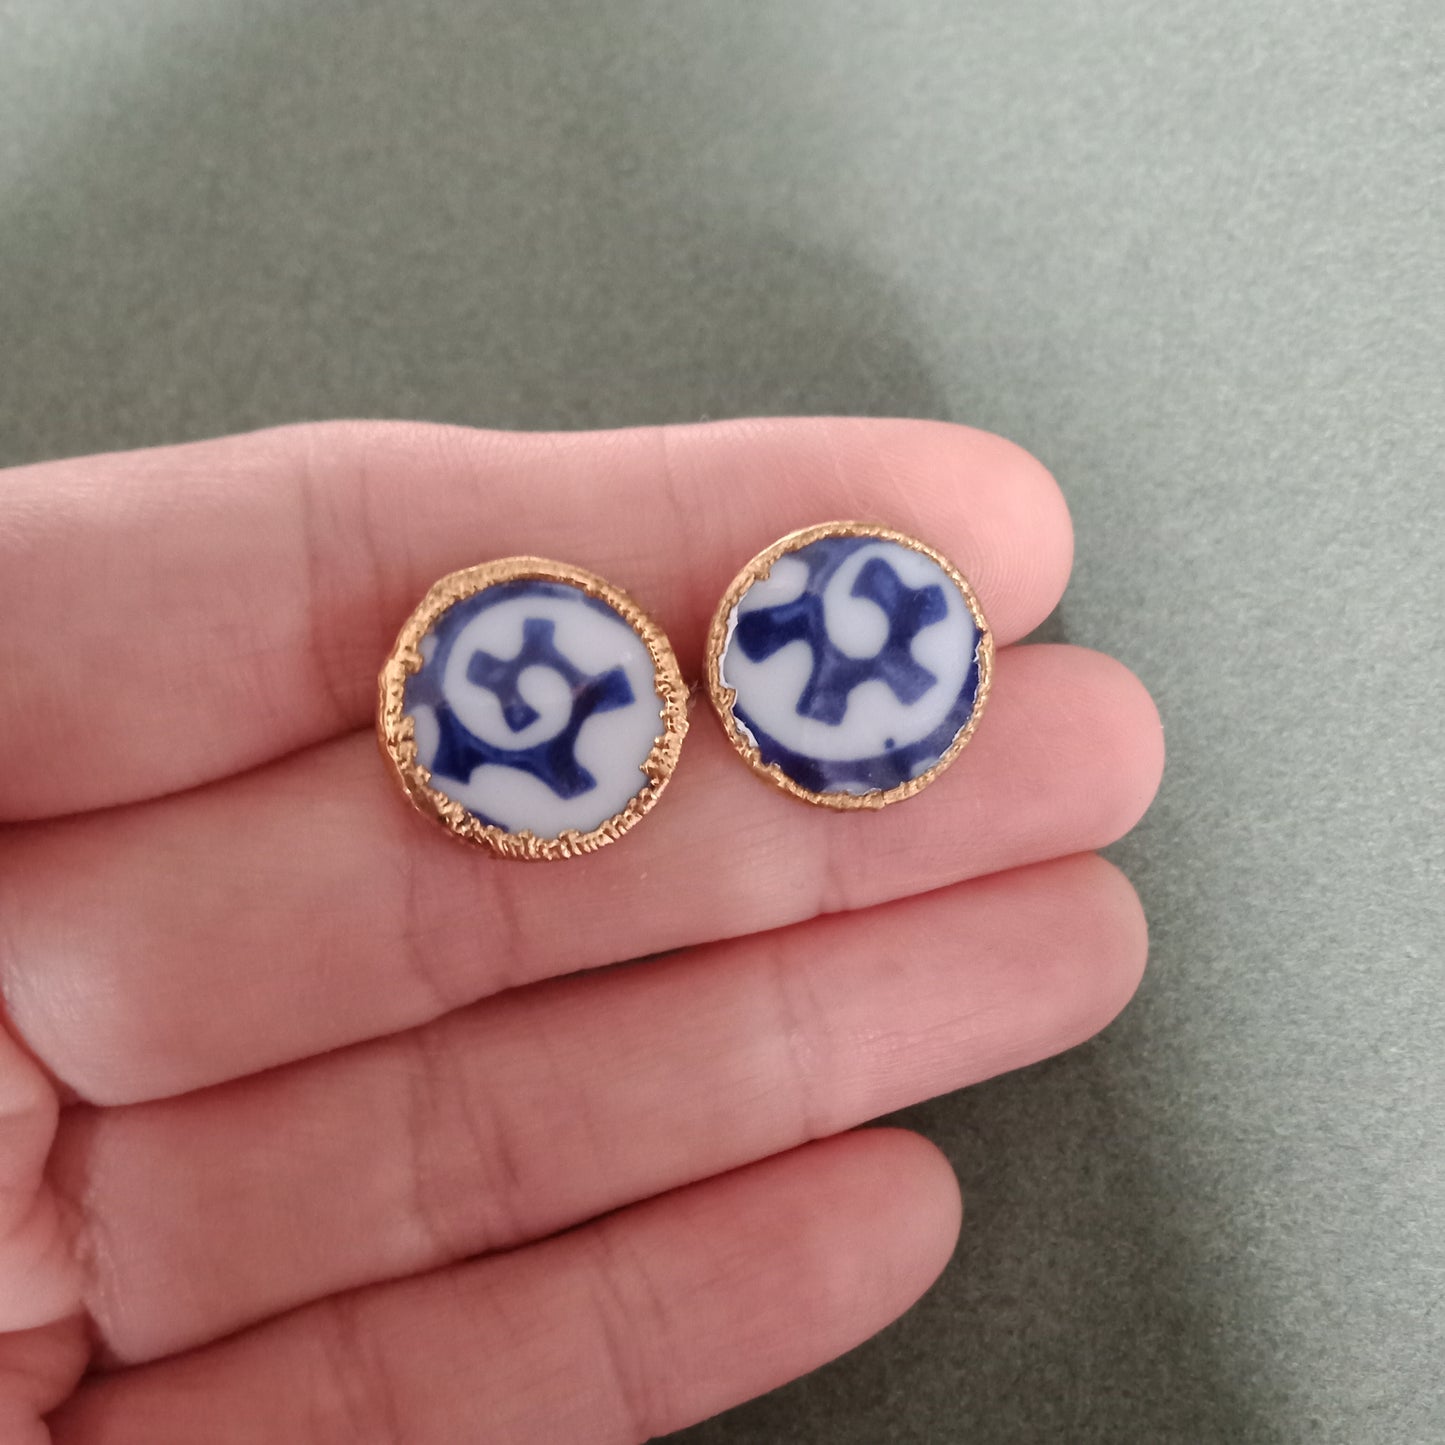 Abstract blue and white porcelain stud earrings